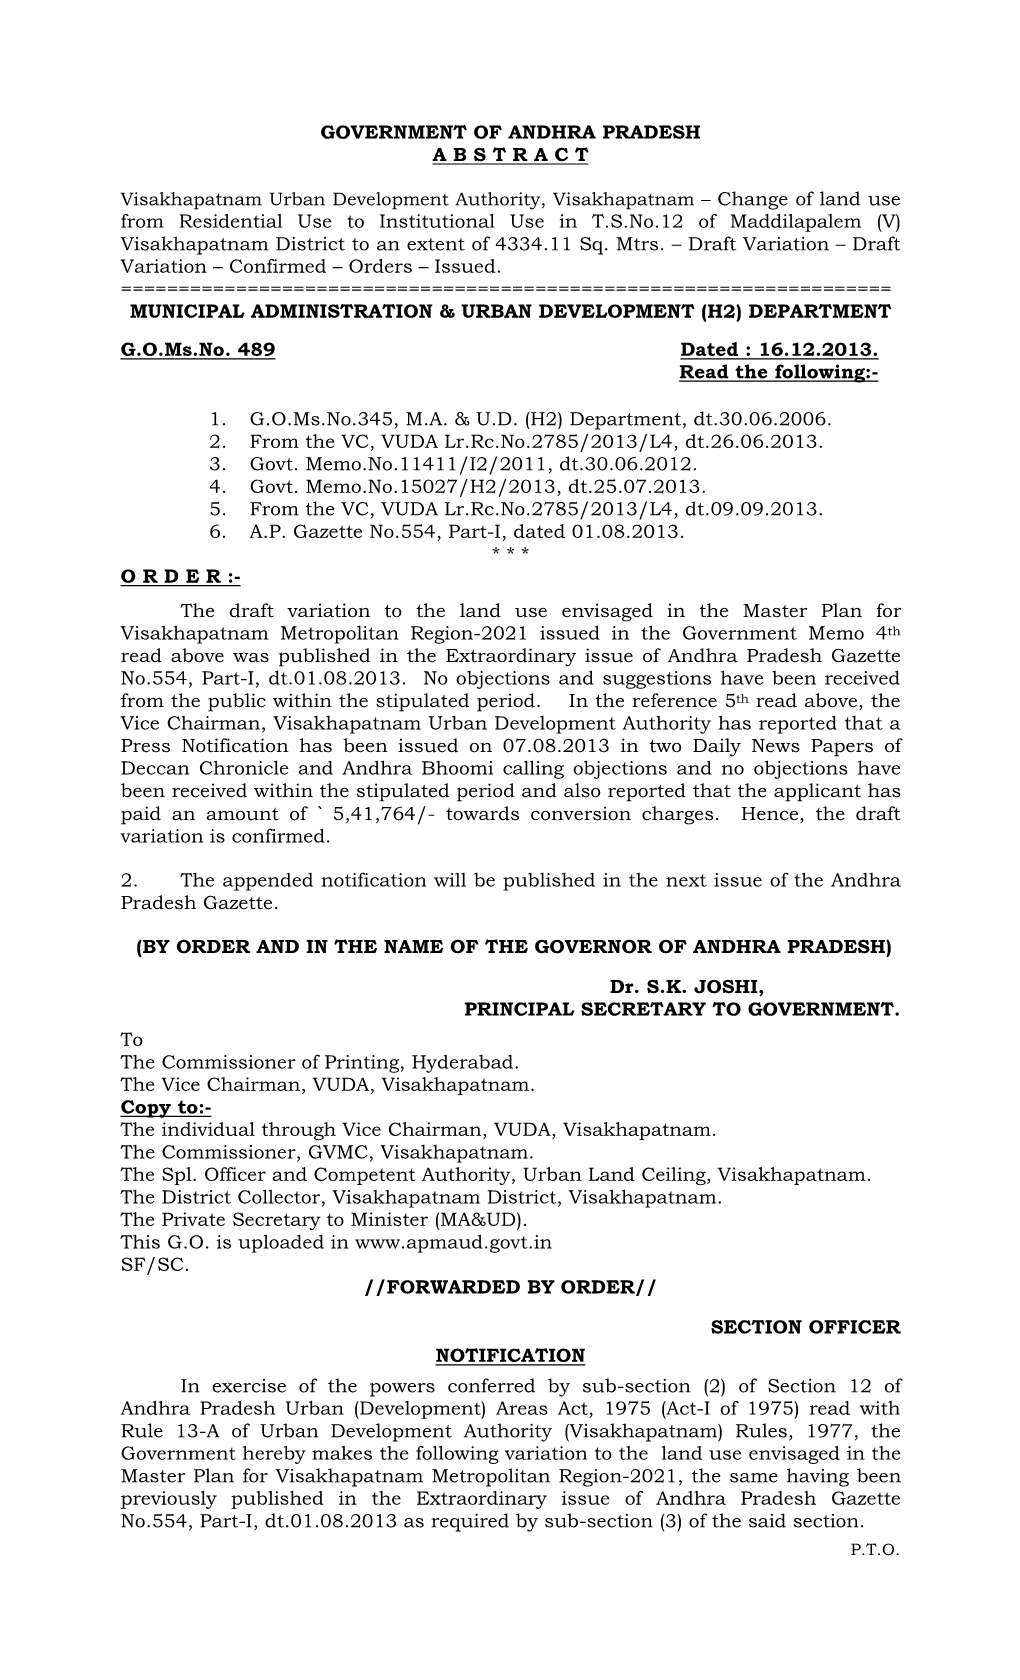 GOVERNMENT of ANDHRA PRADESH ABSTRACT from Residential Use to Institutional Use in Tsno.12 of Maddilapalem